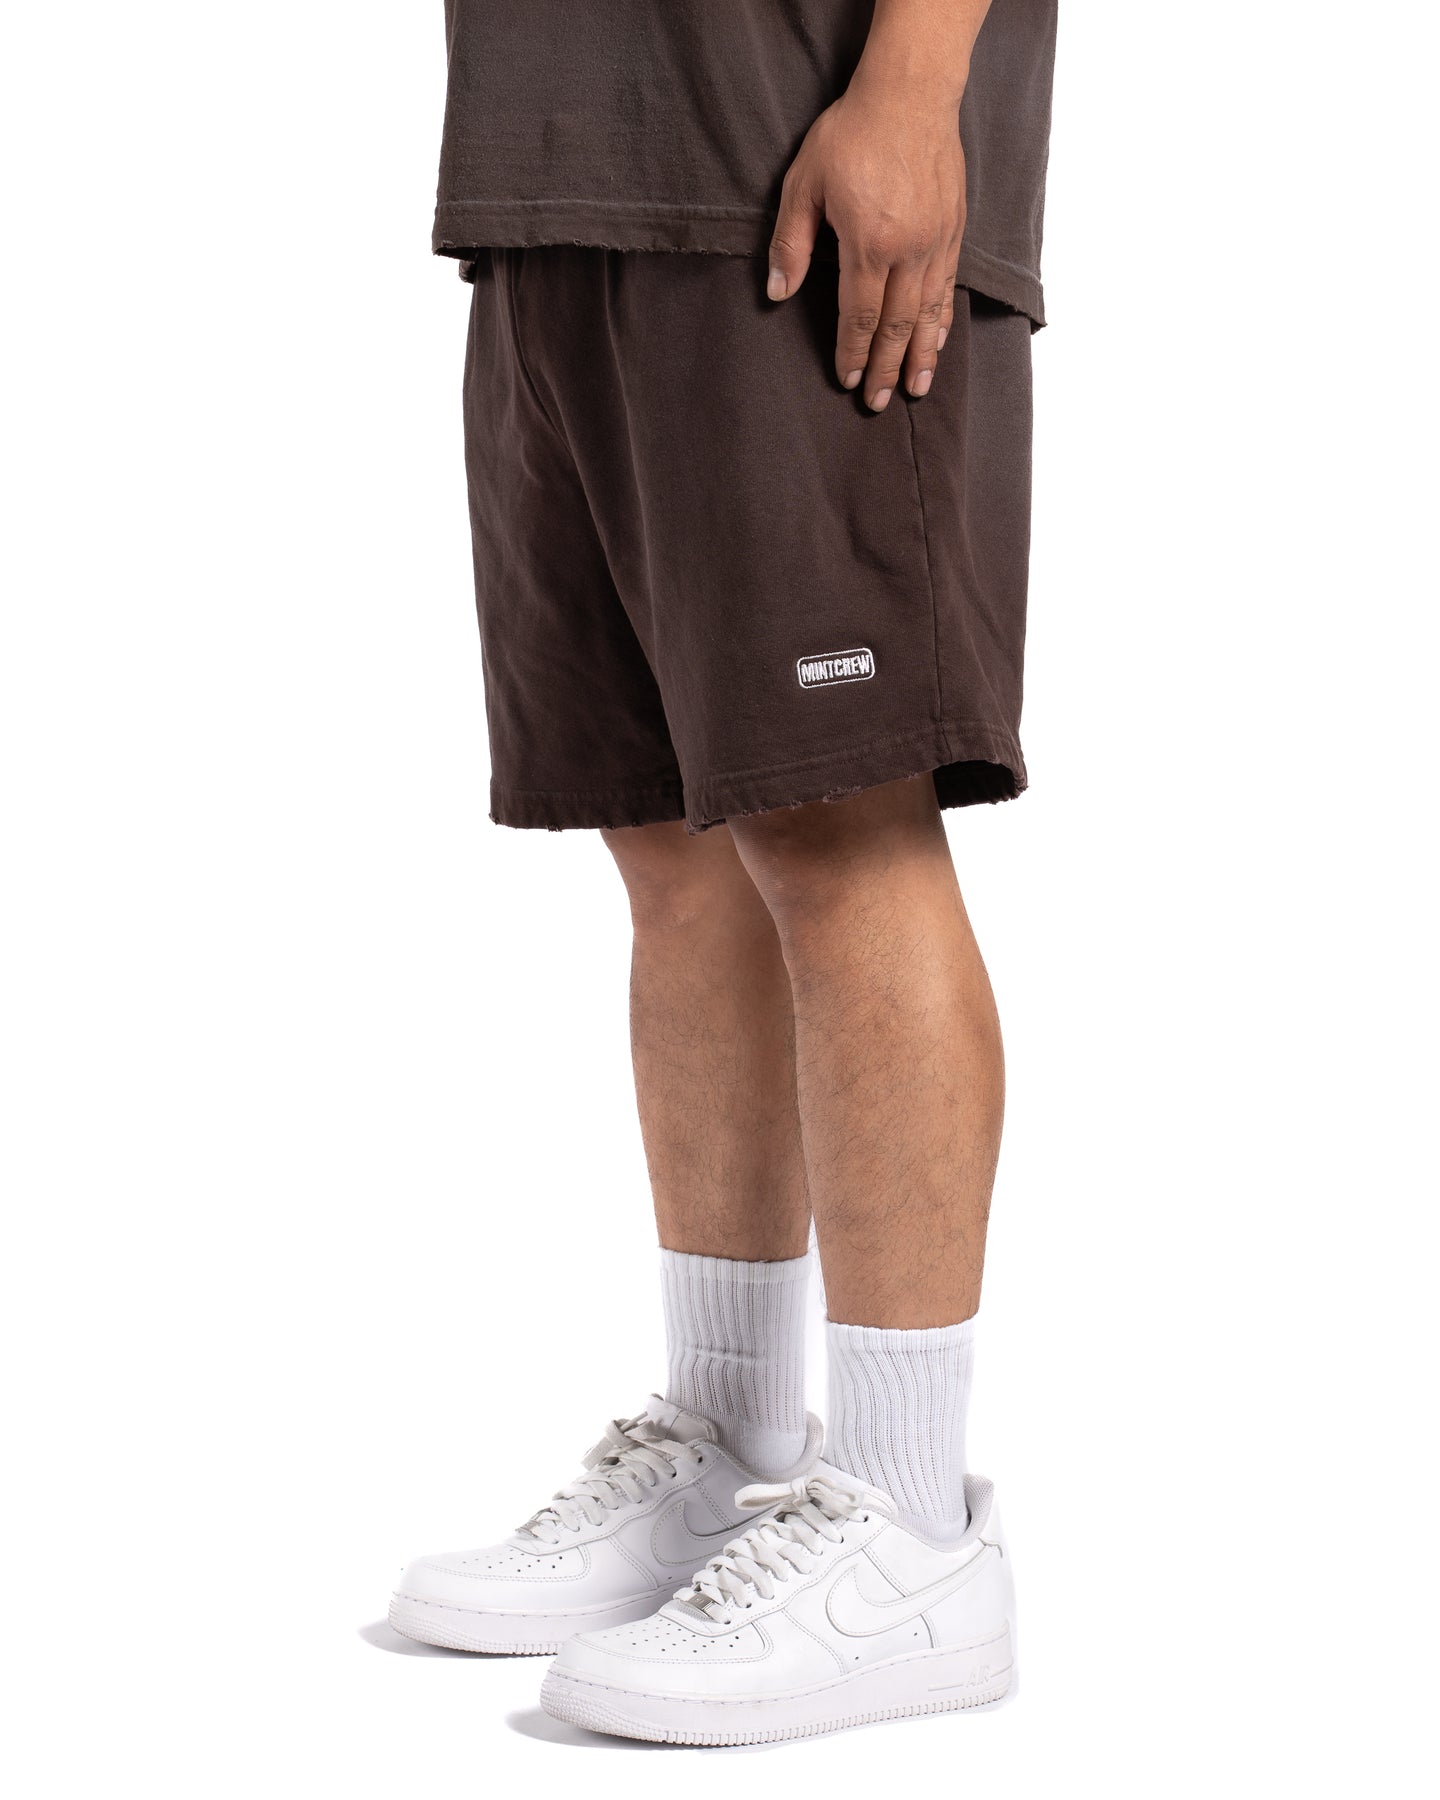 SUN FADED STAMPED LOGO SHORTS (BROWN)